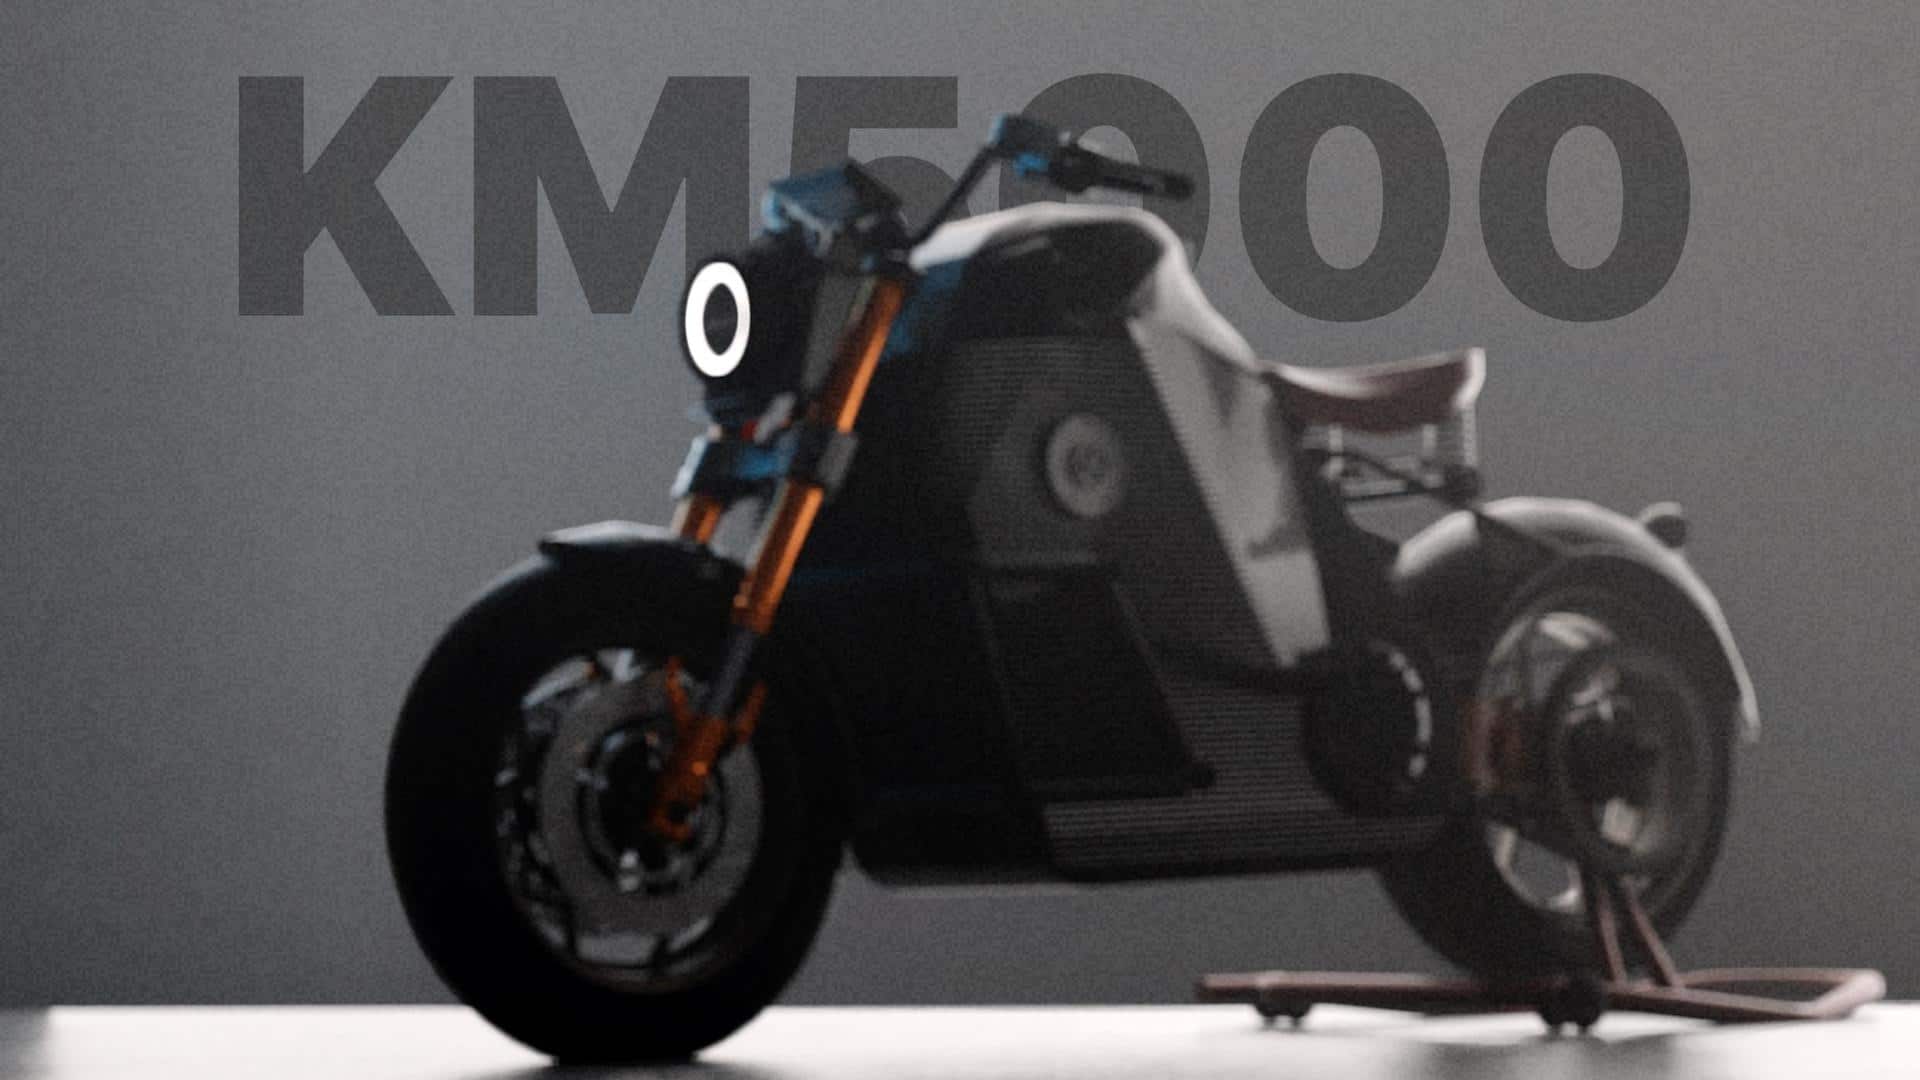 KM5000, fastest Indian electric motorcycle, announced at Rs. 3.15 lakh